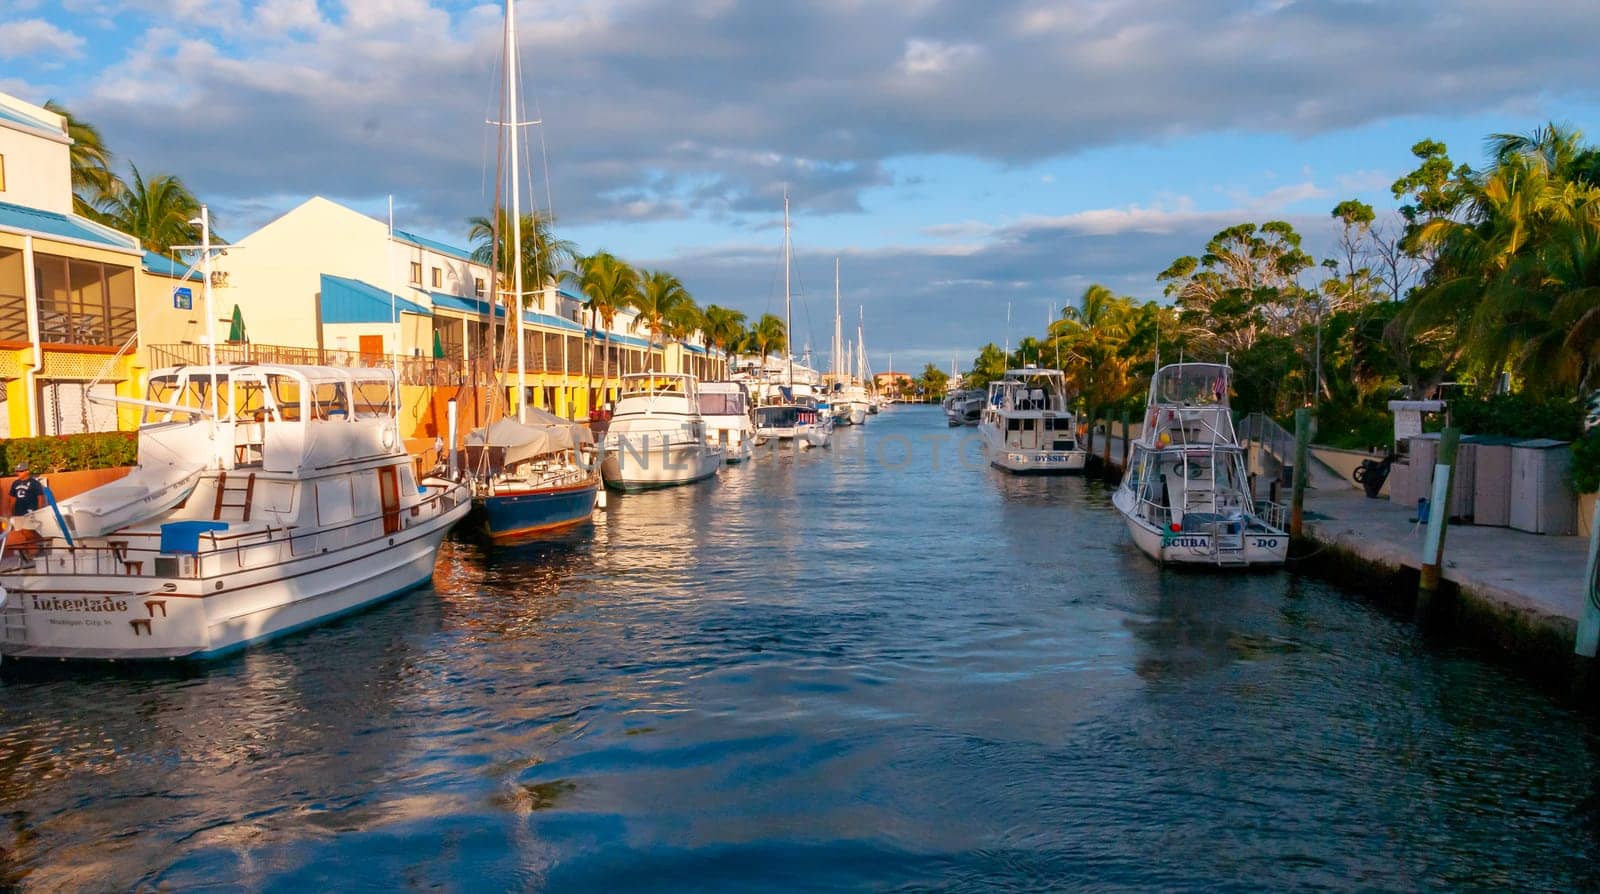 USA, FLORIDA - November 29, 2011: Boats in the canals in south Florida